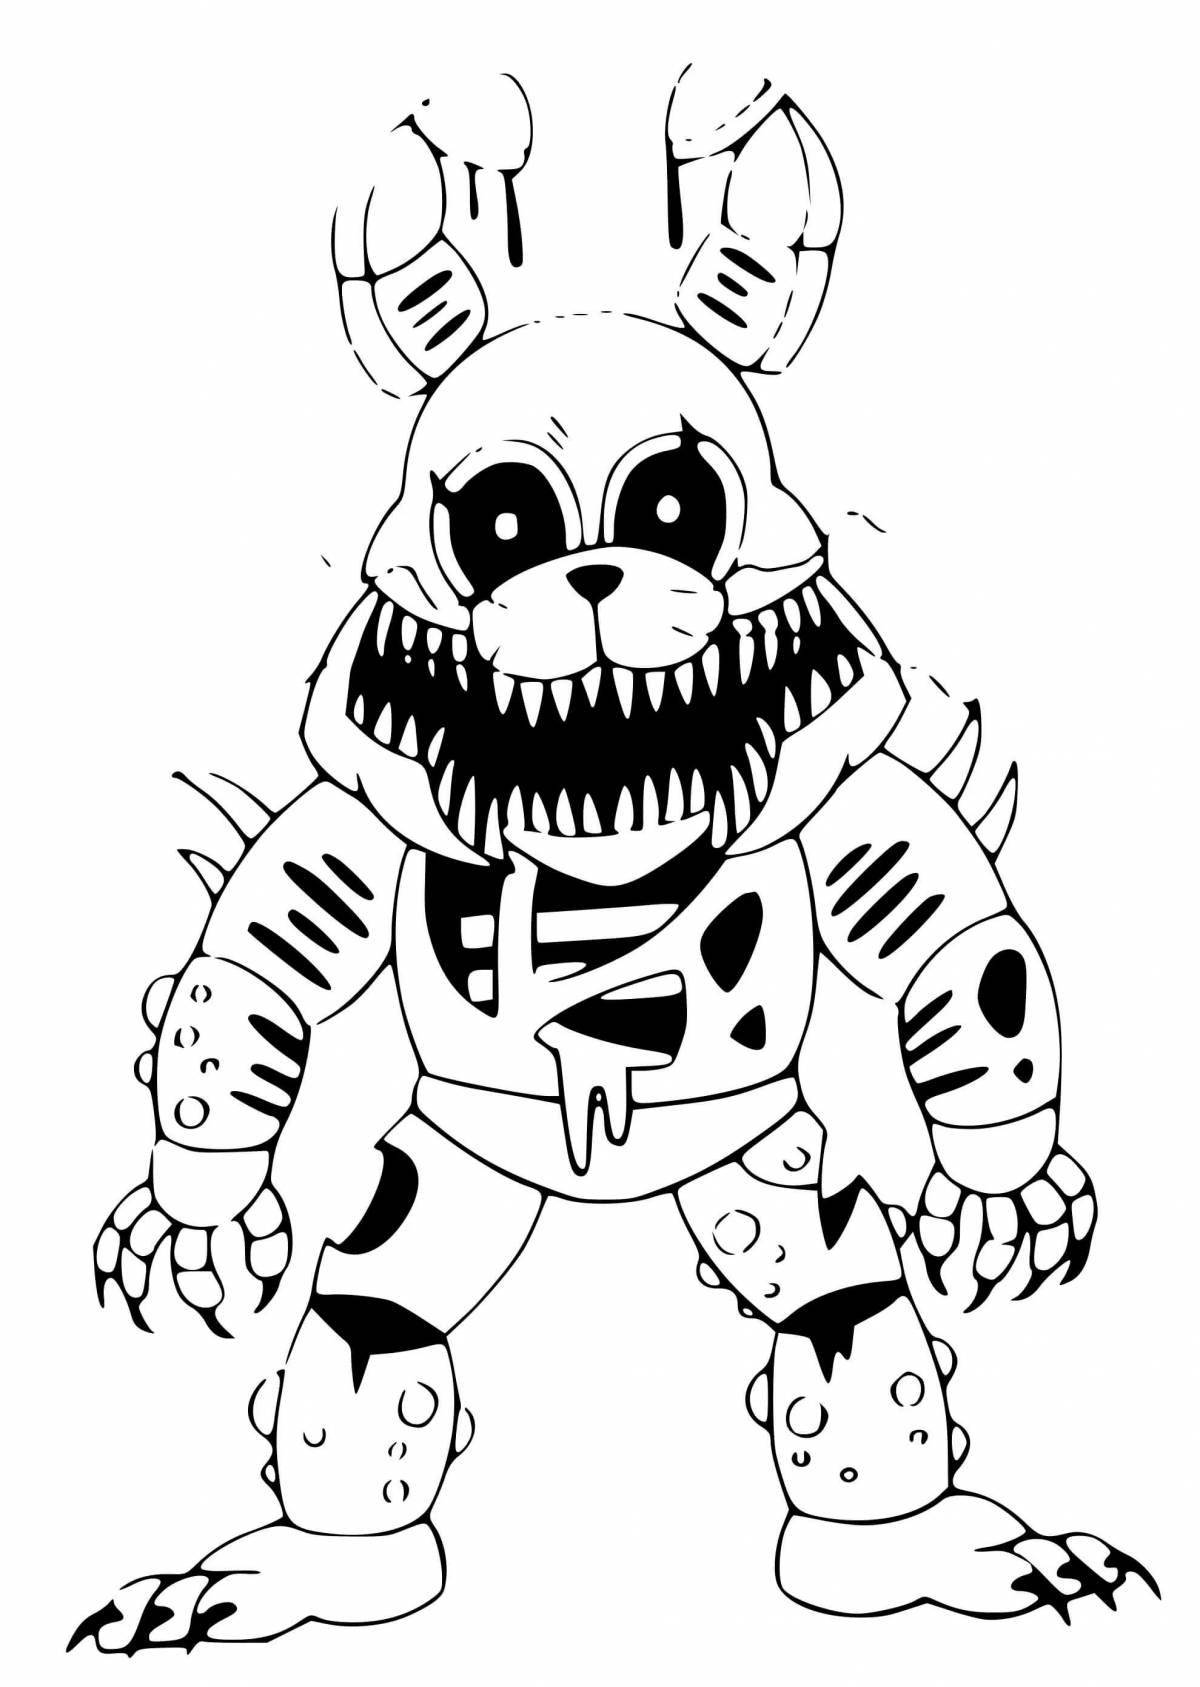 Exciting fnaf 1 bonnie coloring